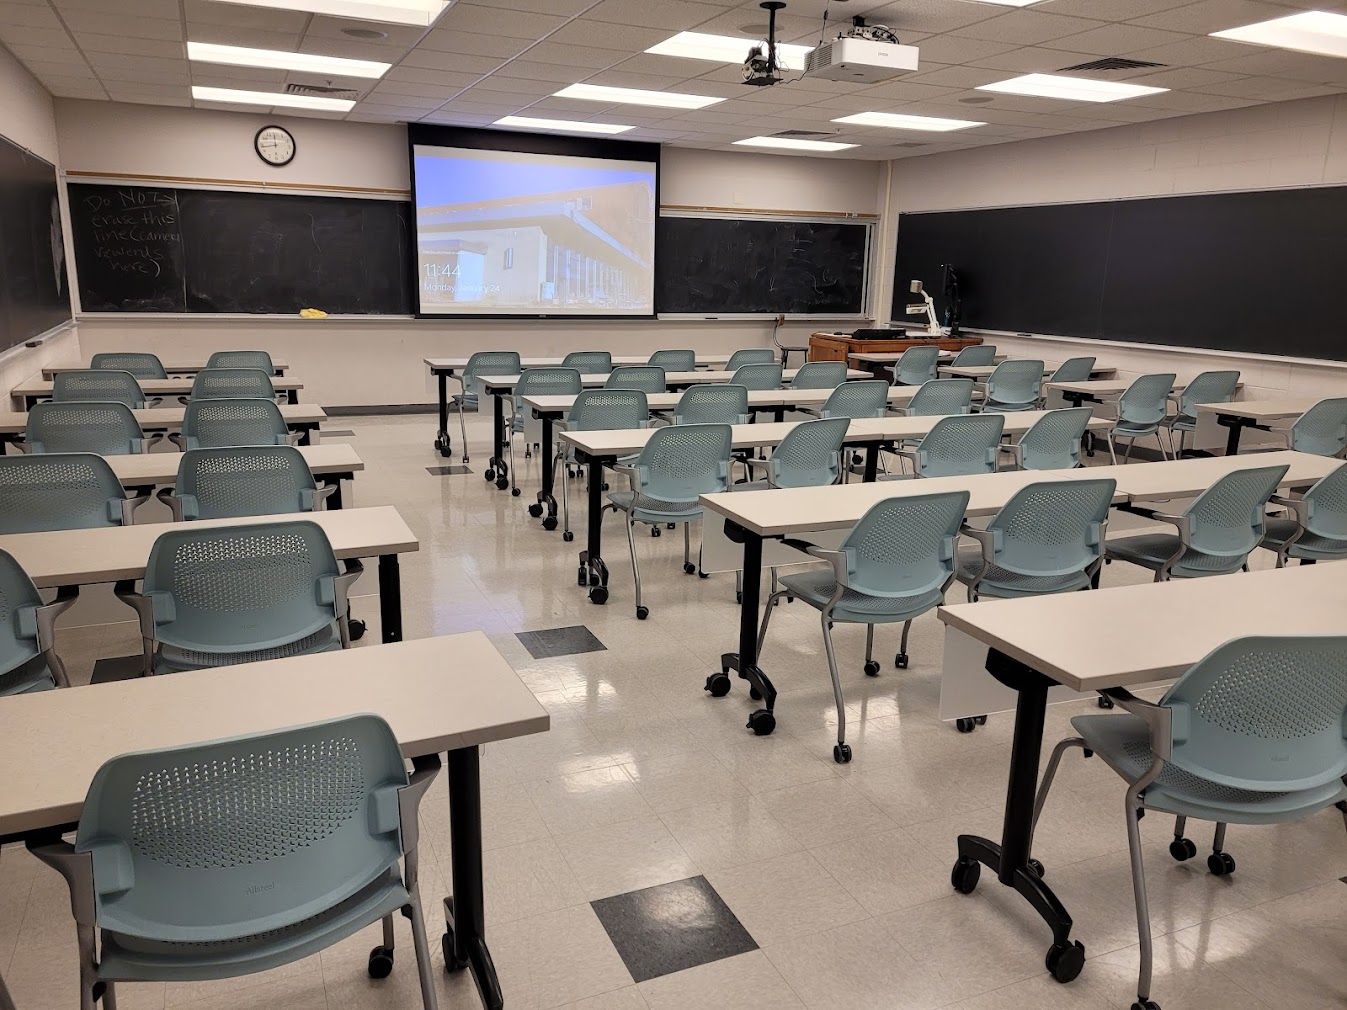 A view of the classroom with movable tables and chairs, chalkboards, and an instructor table in front.